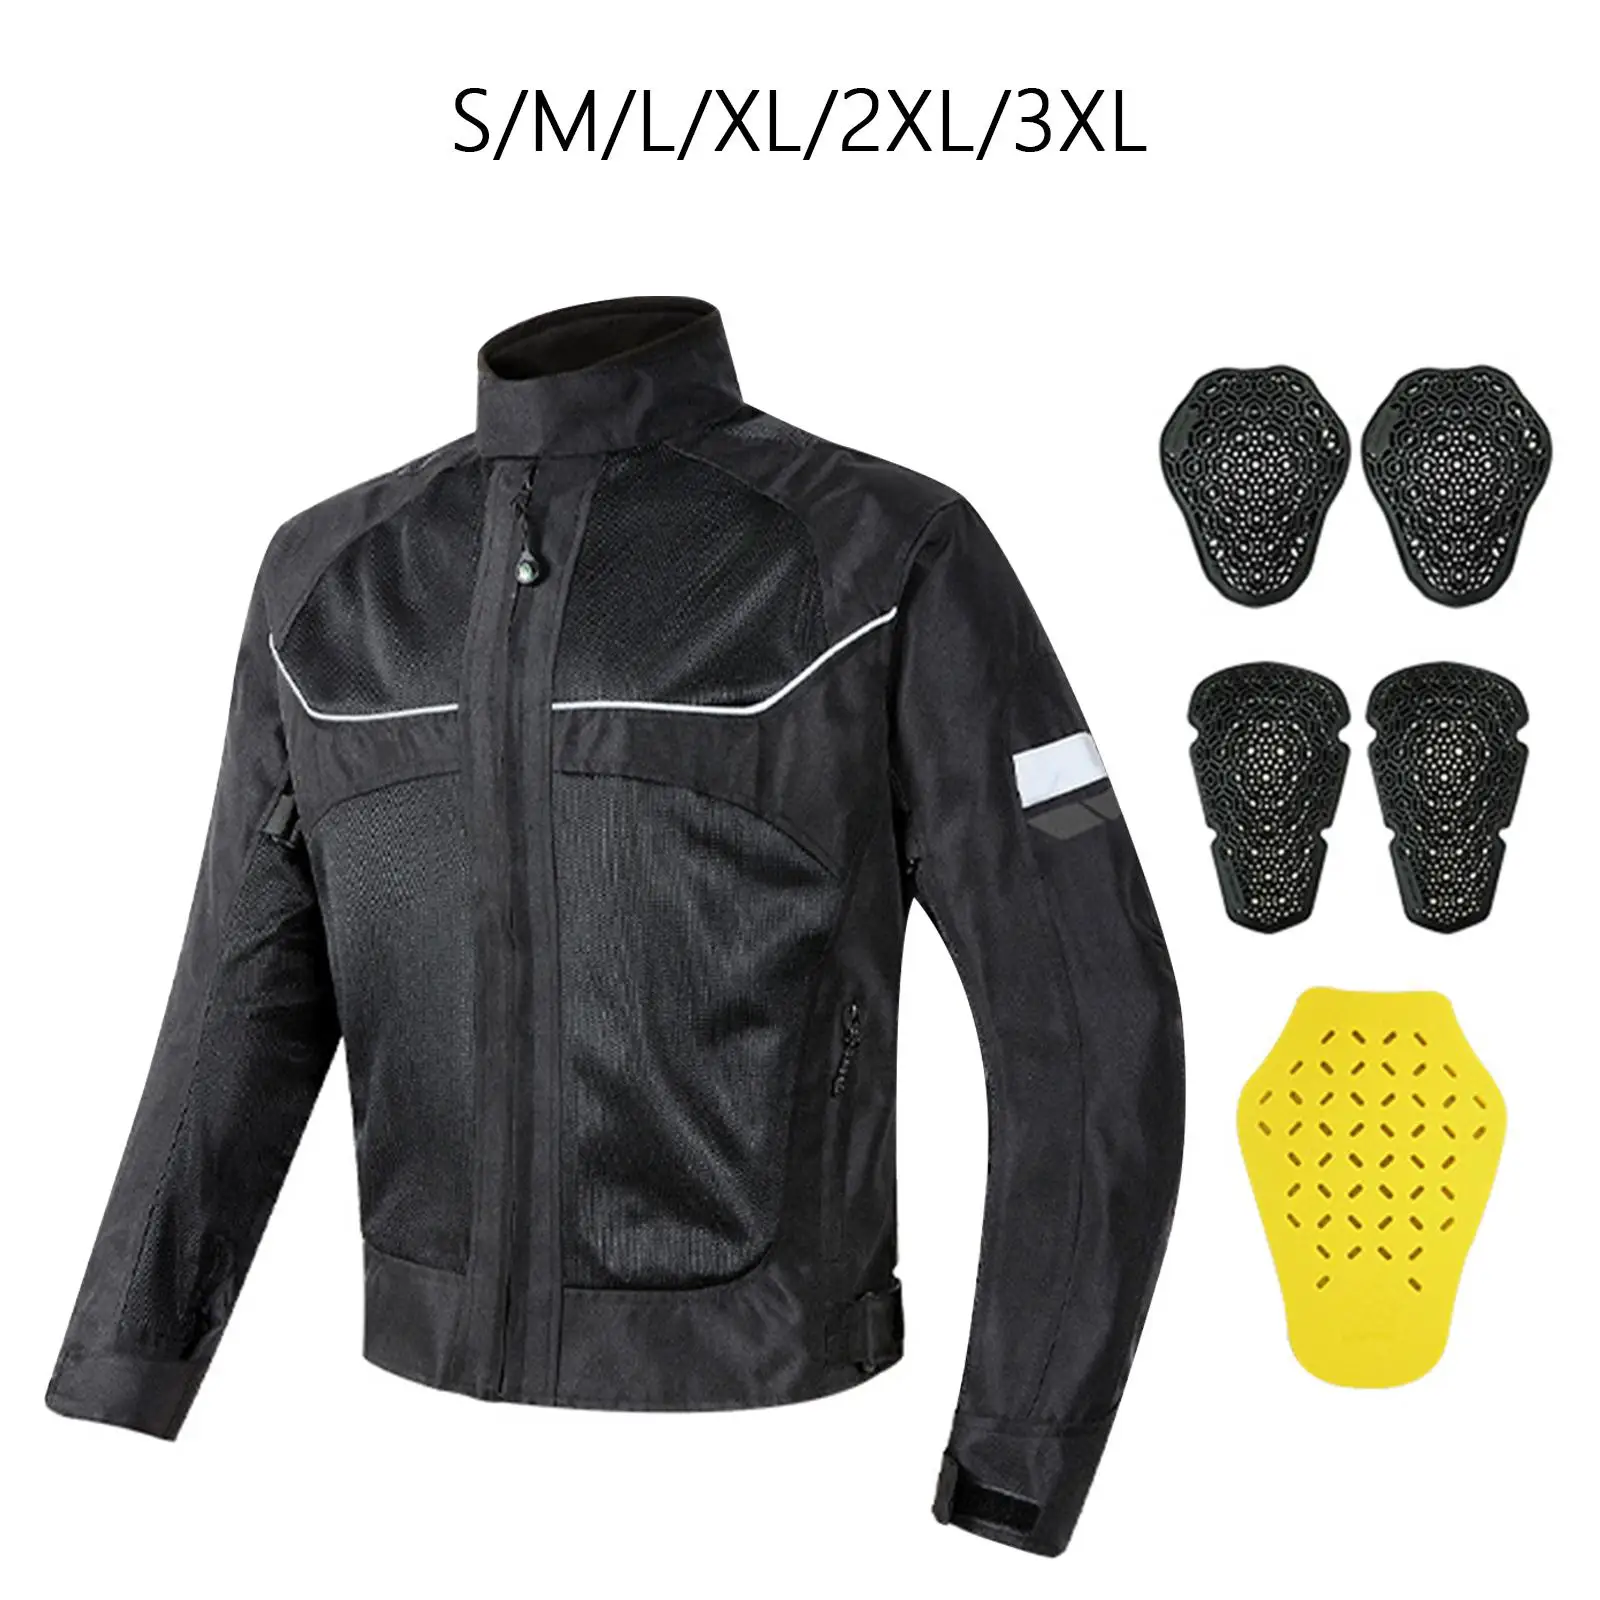 Motorcycle Riding Jacket Motorcyclist Jacket for Men Women Touring